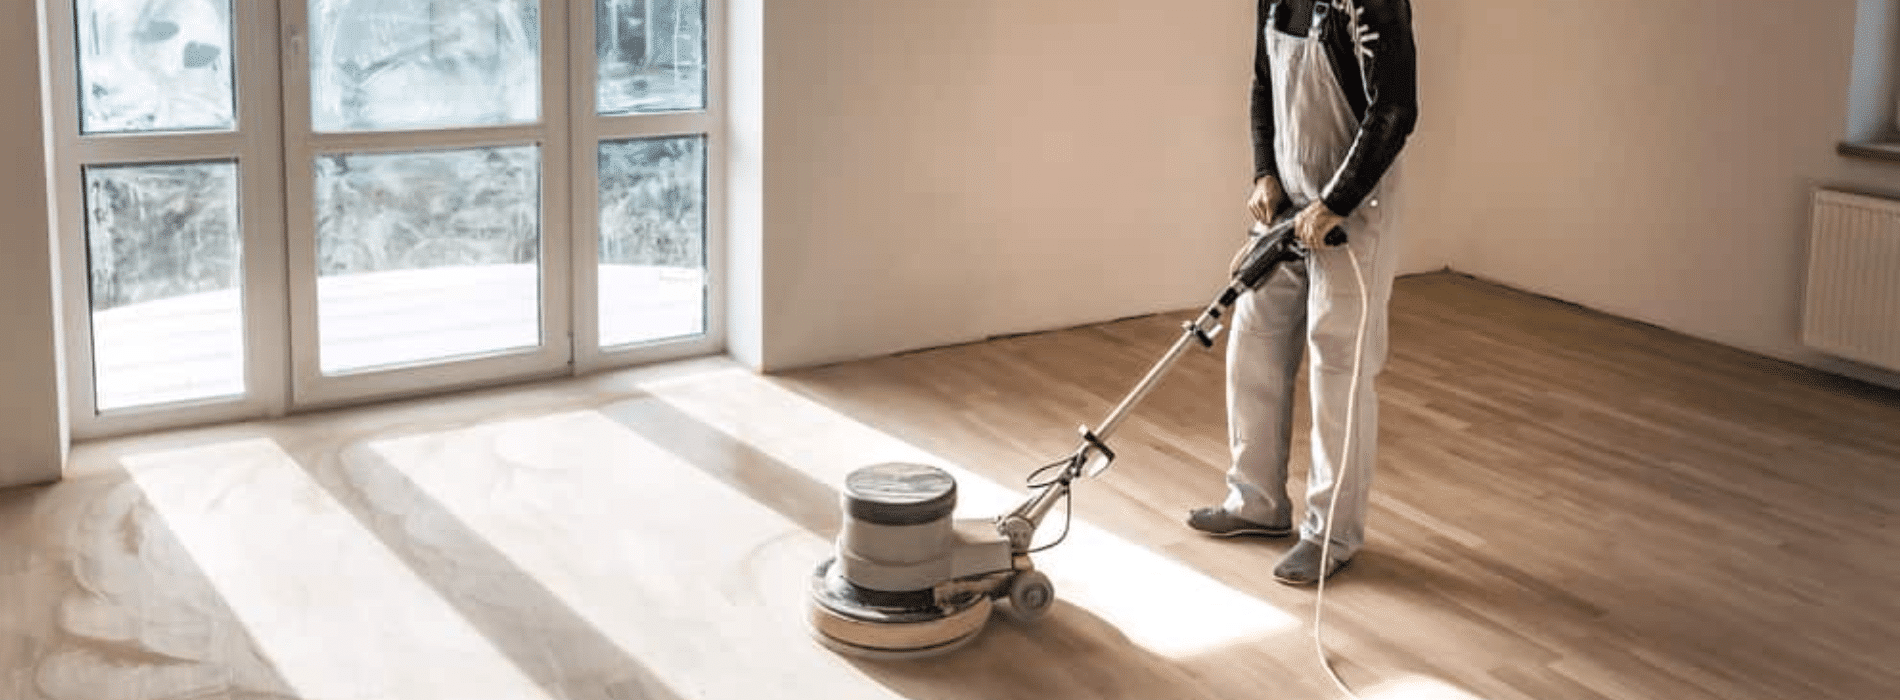 In South West London, SW, Mr Sander® use the Bona FlexiSand 1.5, a powerful and efficient floor sander with a 407 mm diameter. It operates at 1.5 kW with a voltage of 230 V and a frequency of 50 Hz/60 Hz. Connected to a dust extraction system with a HEPA filter, it ensures a clean and superior sanding outcome. 